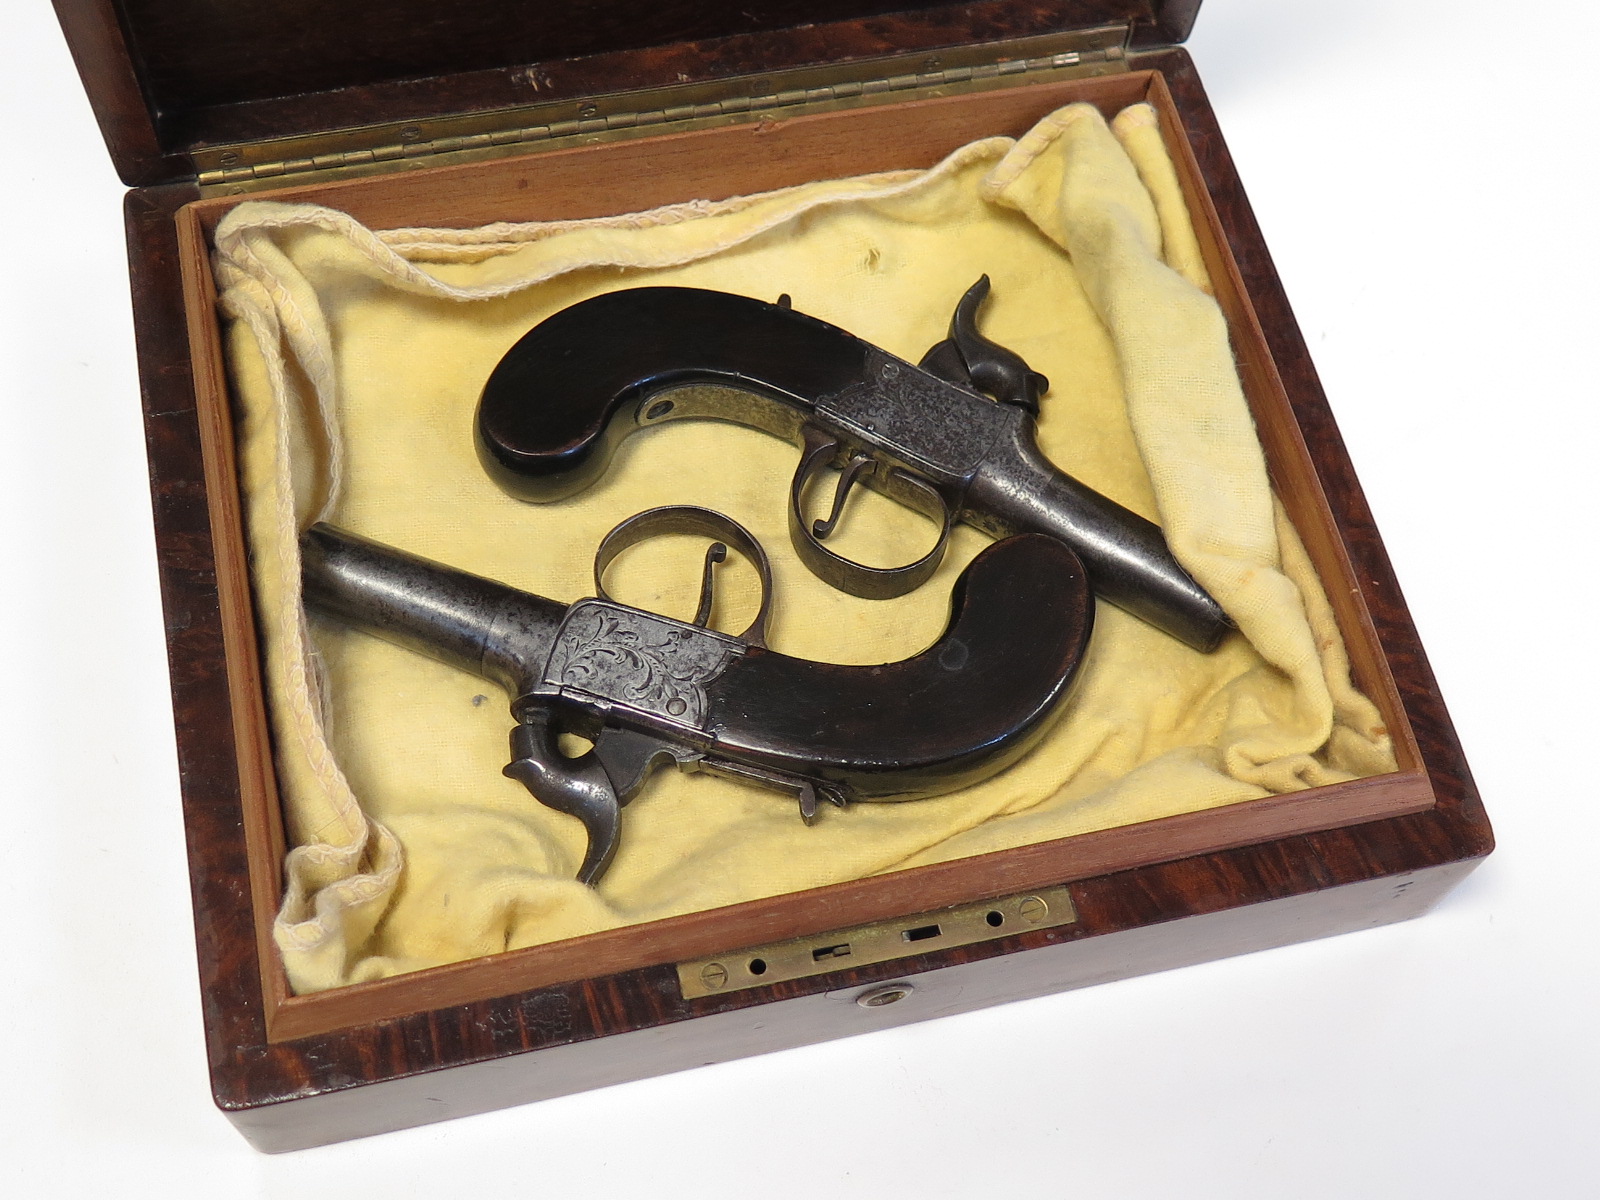 19th century matched pair of percussion box lock pistols with English proof marks in unlined case